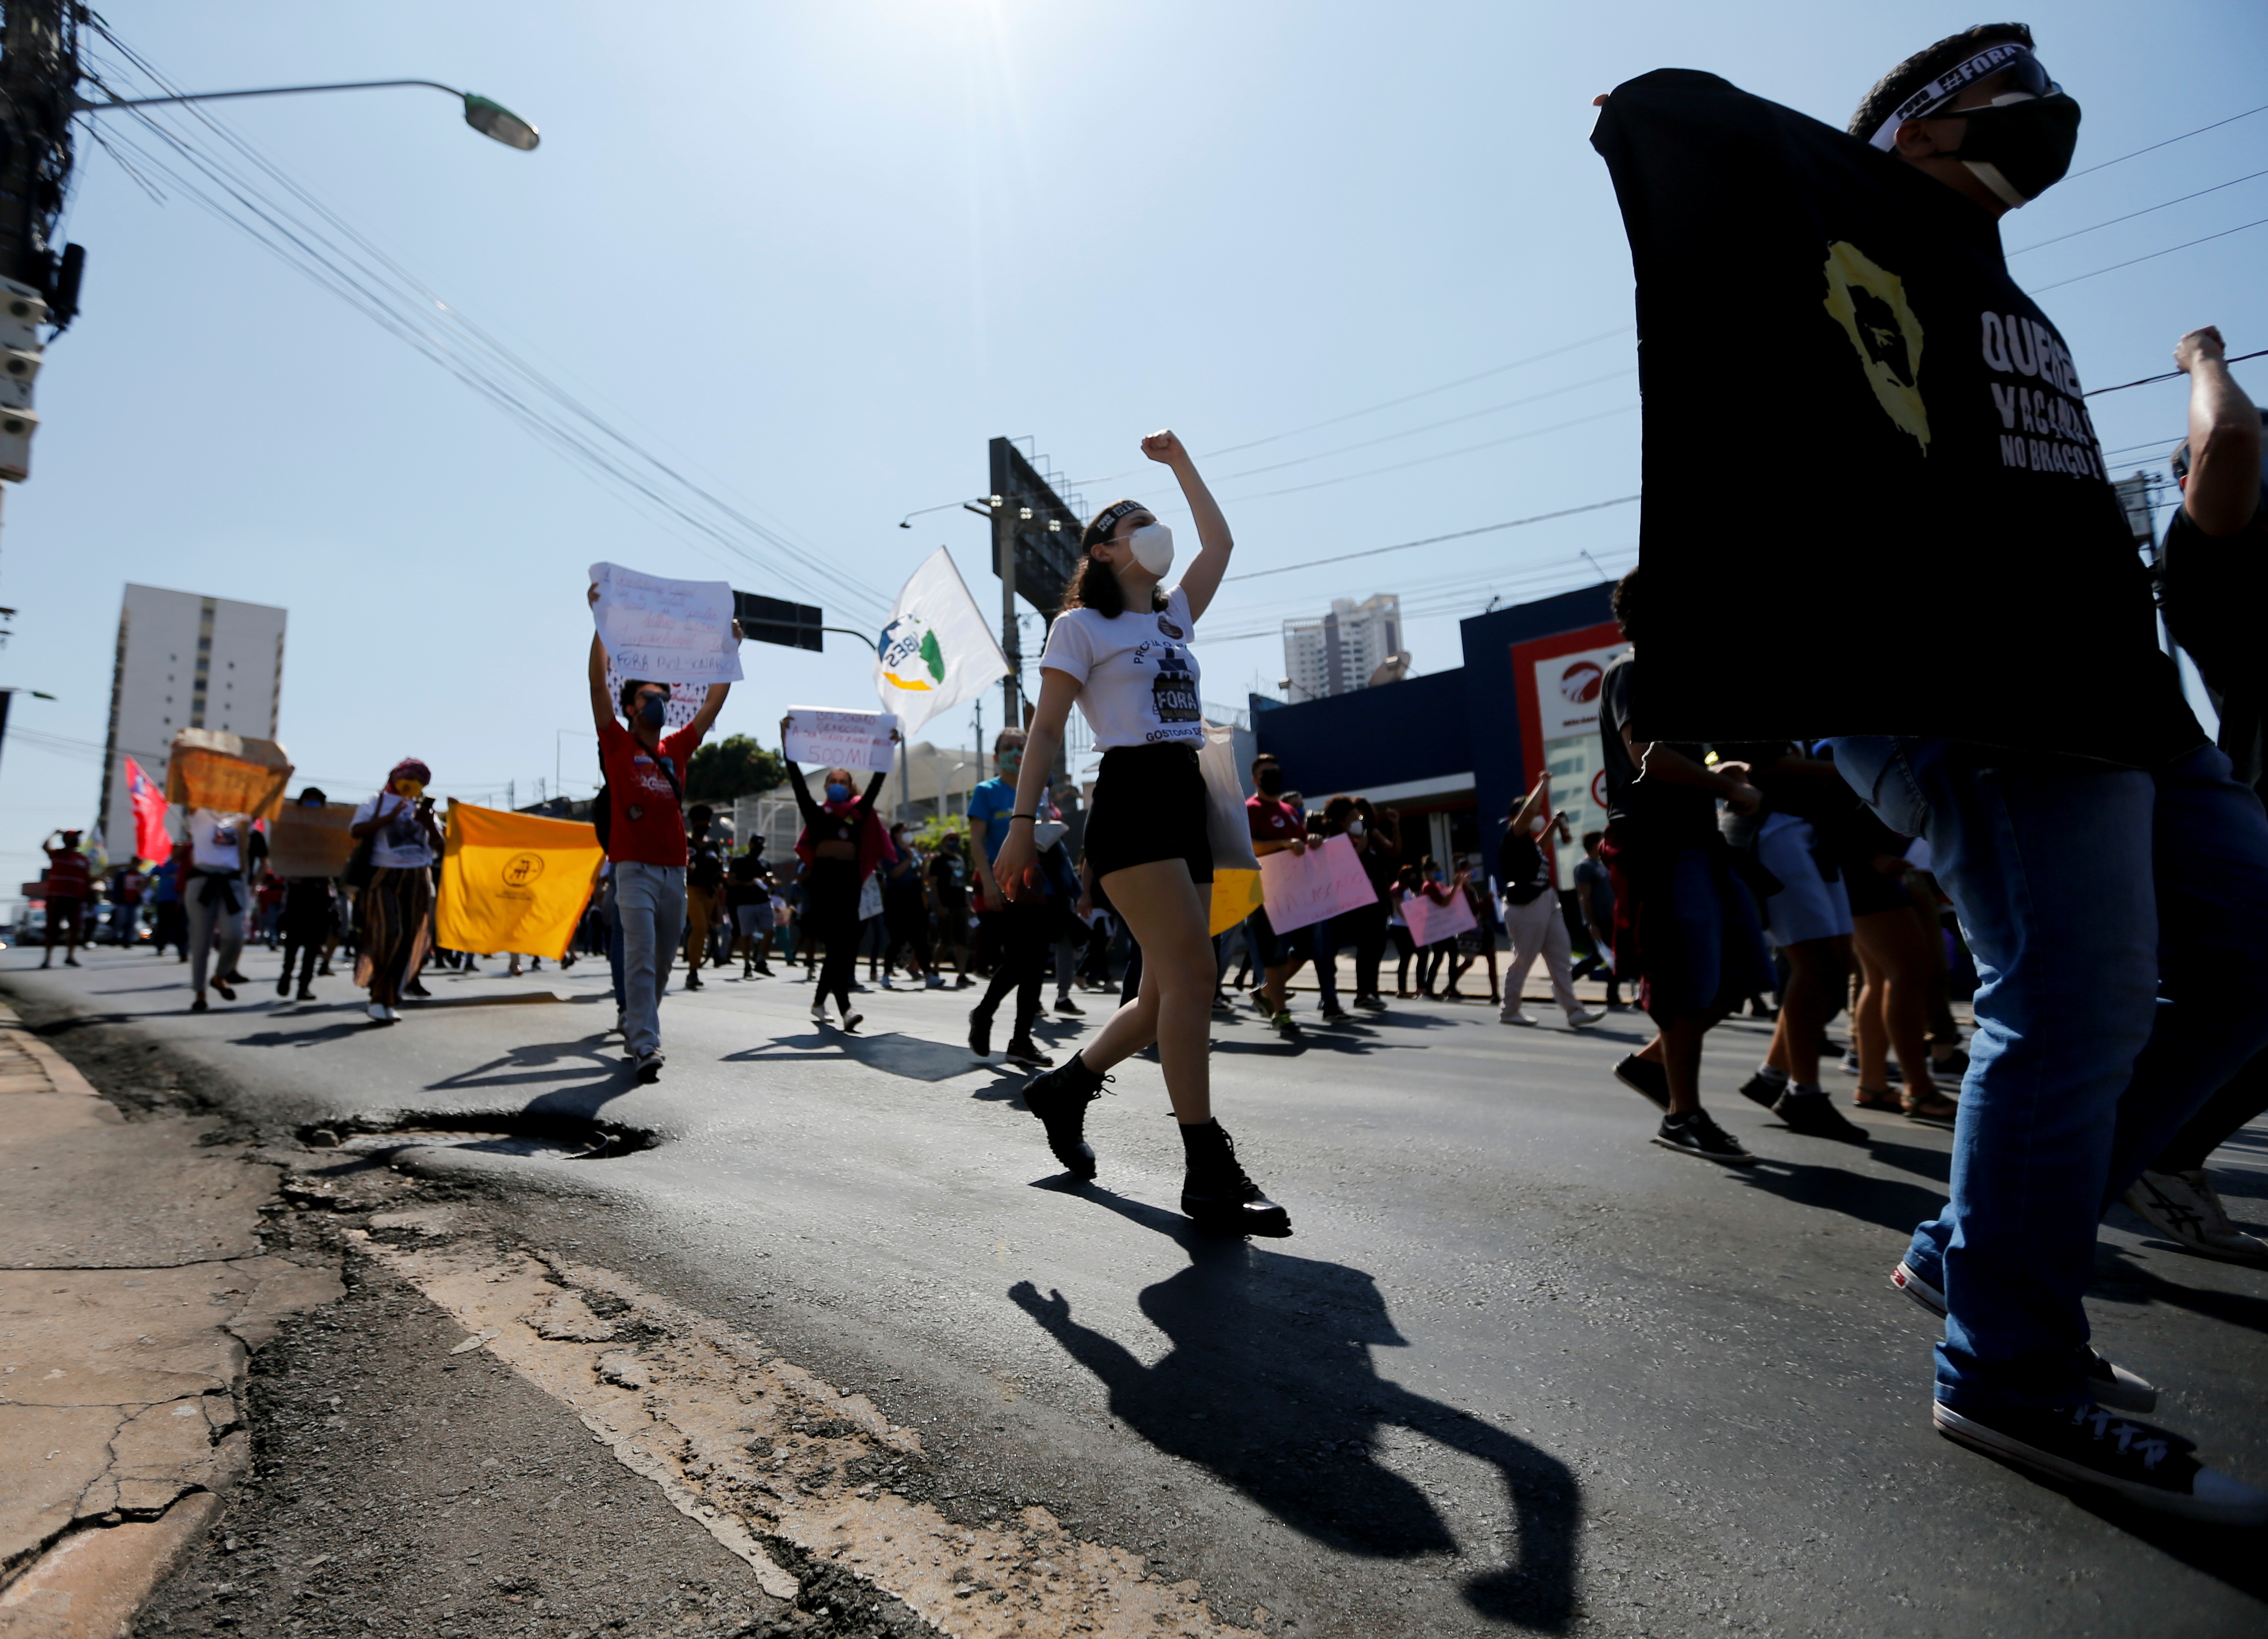 People participate in a protest against Brazil's President Jair Bolsonaro and his handling of the coronavirus disease (COVID-19) pandemic in Cuiaba, Brazil, June 19, 2021. REUTERS/Mariana Greif